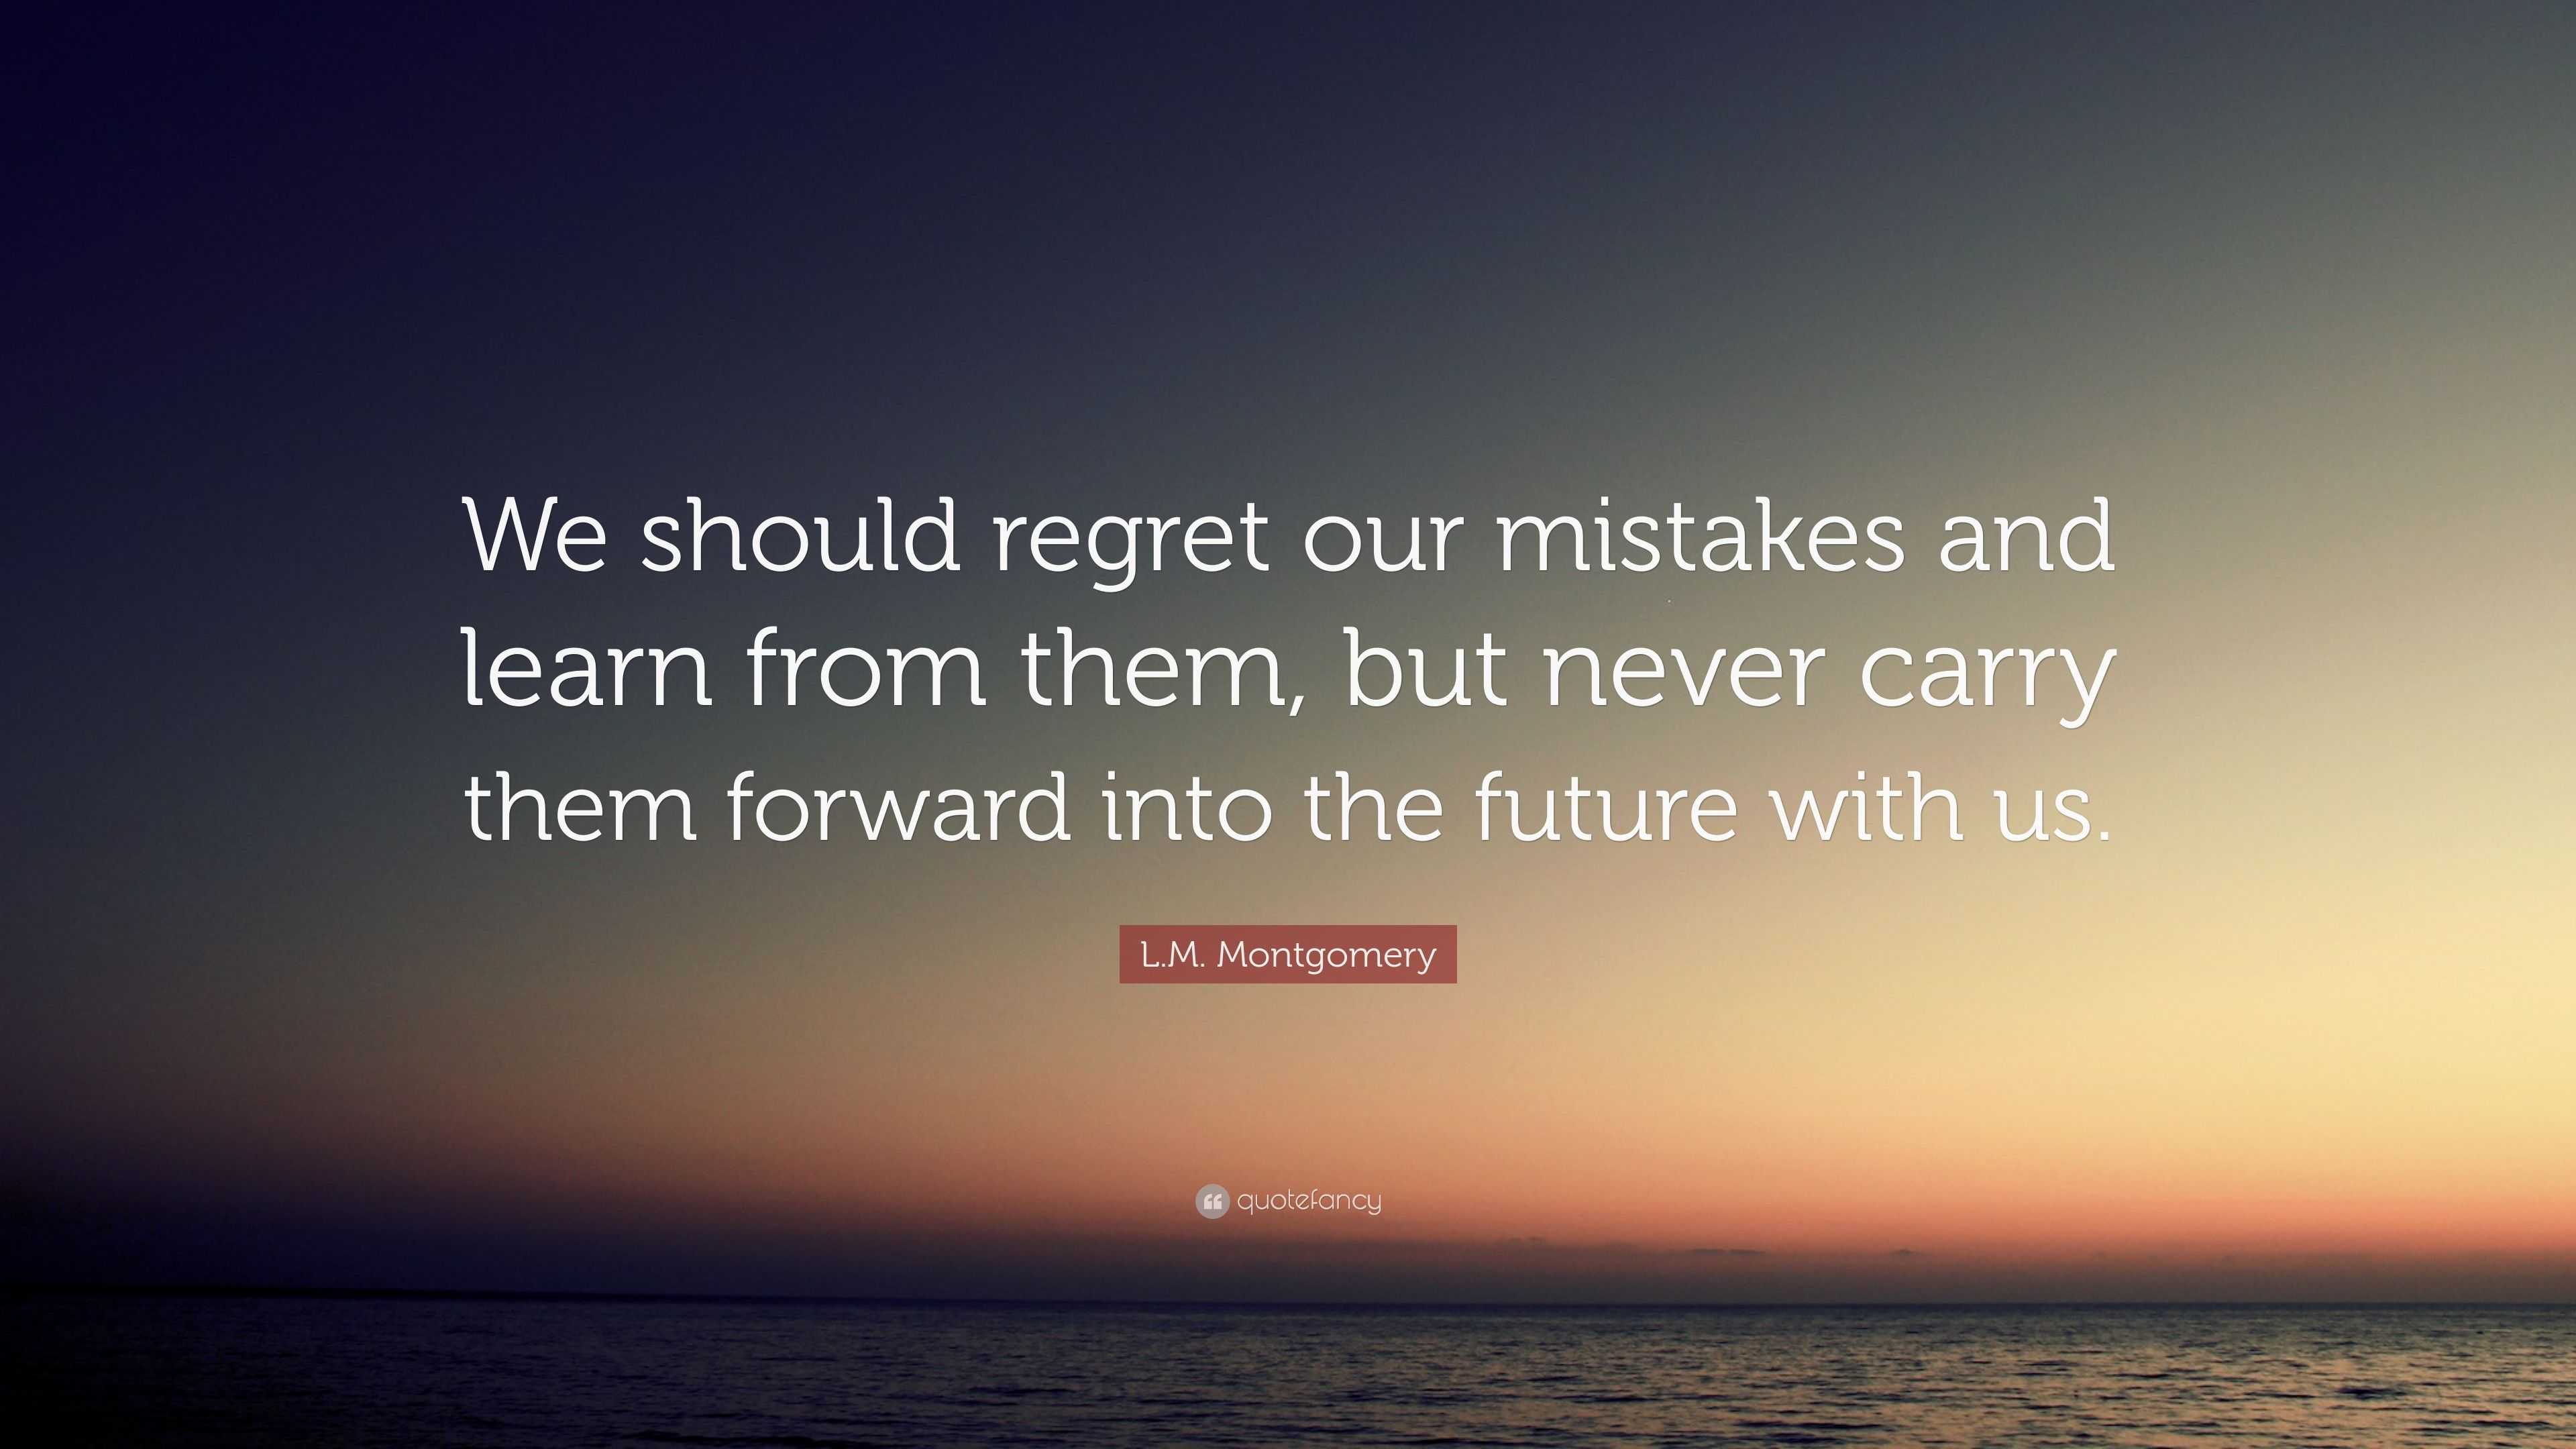 It's better to learn to from our mistakes than live with regrets